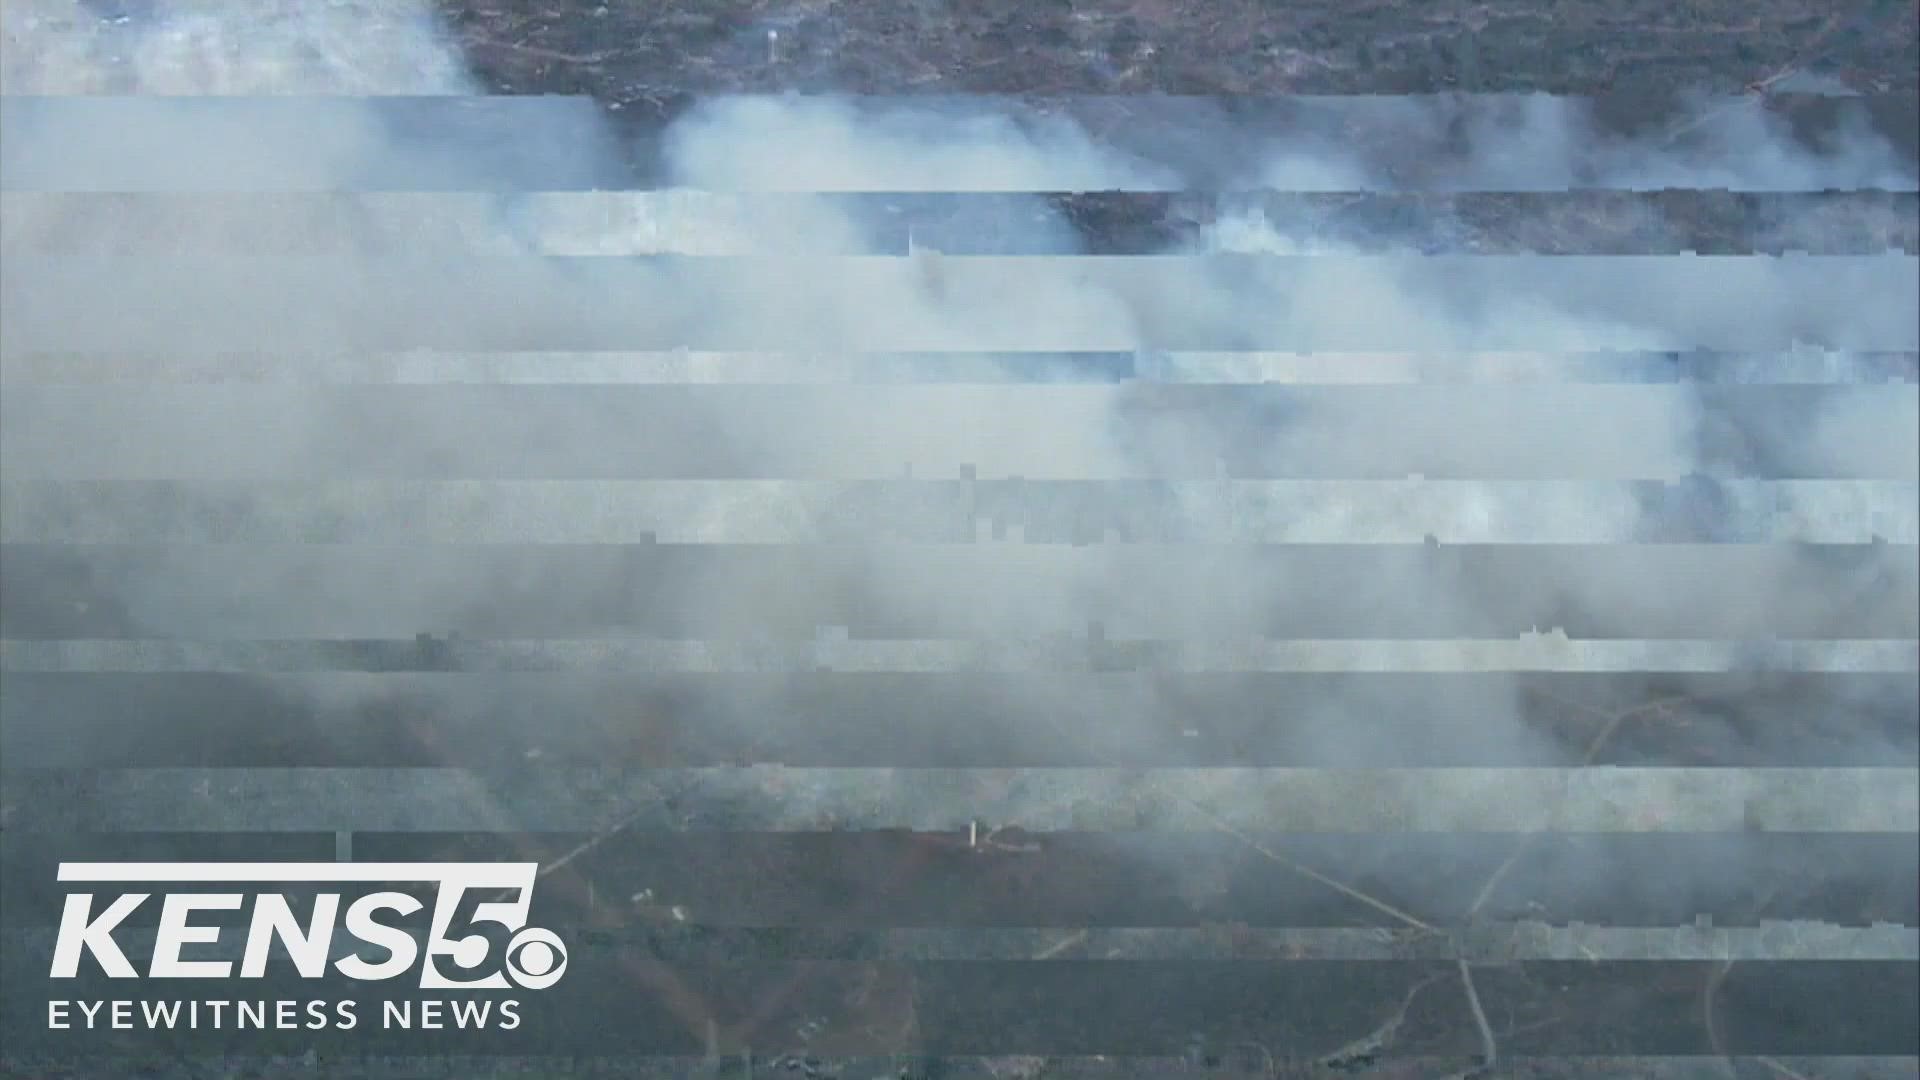 A fire broke out in Bastrop, Texas, on Jan. 18, burning hundreds of acres. The fire started from a prescribed burn that got out of control. Here are aerial views.